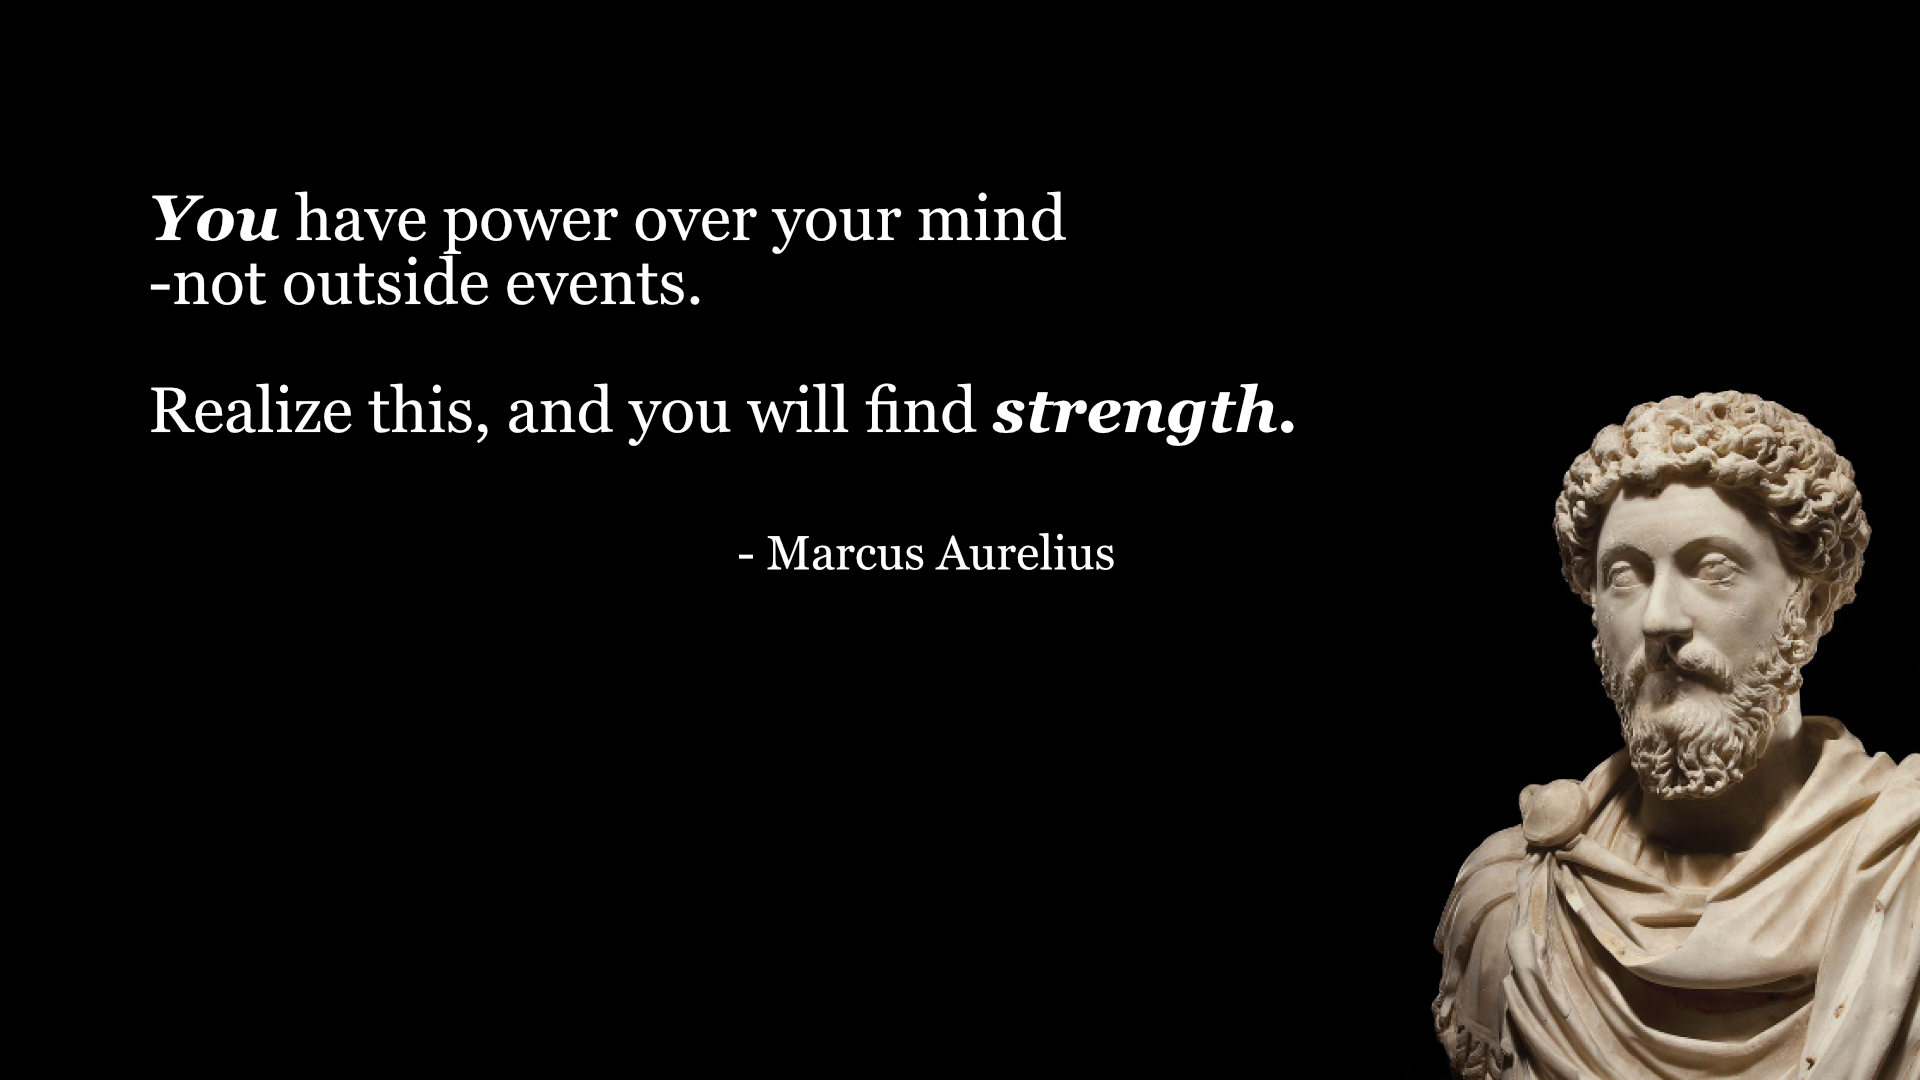 Wallpaper Marcus Aurelius  an image of the Equestrian Statue and a Bust  from the Glyptothek in Munich 1920x1080  rStoicism